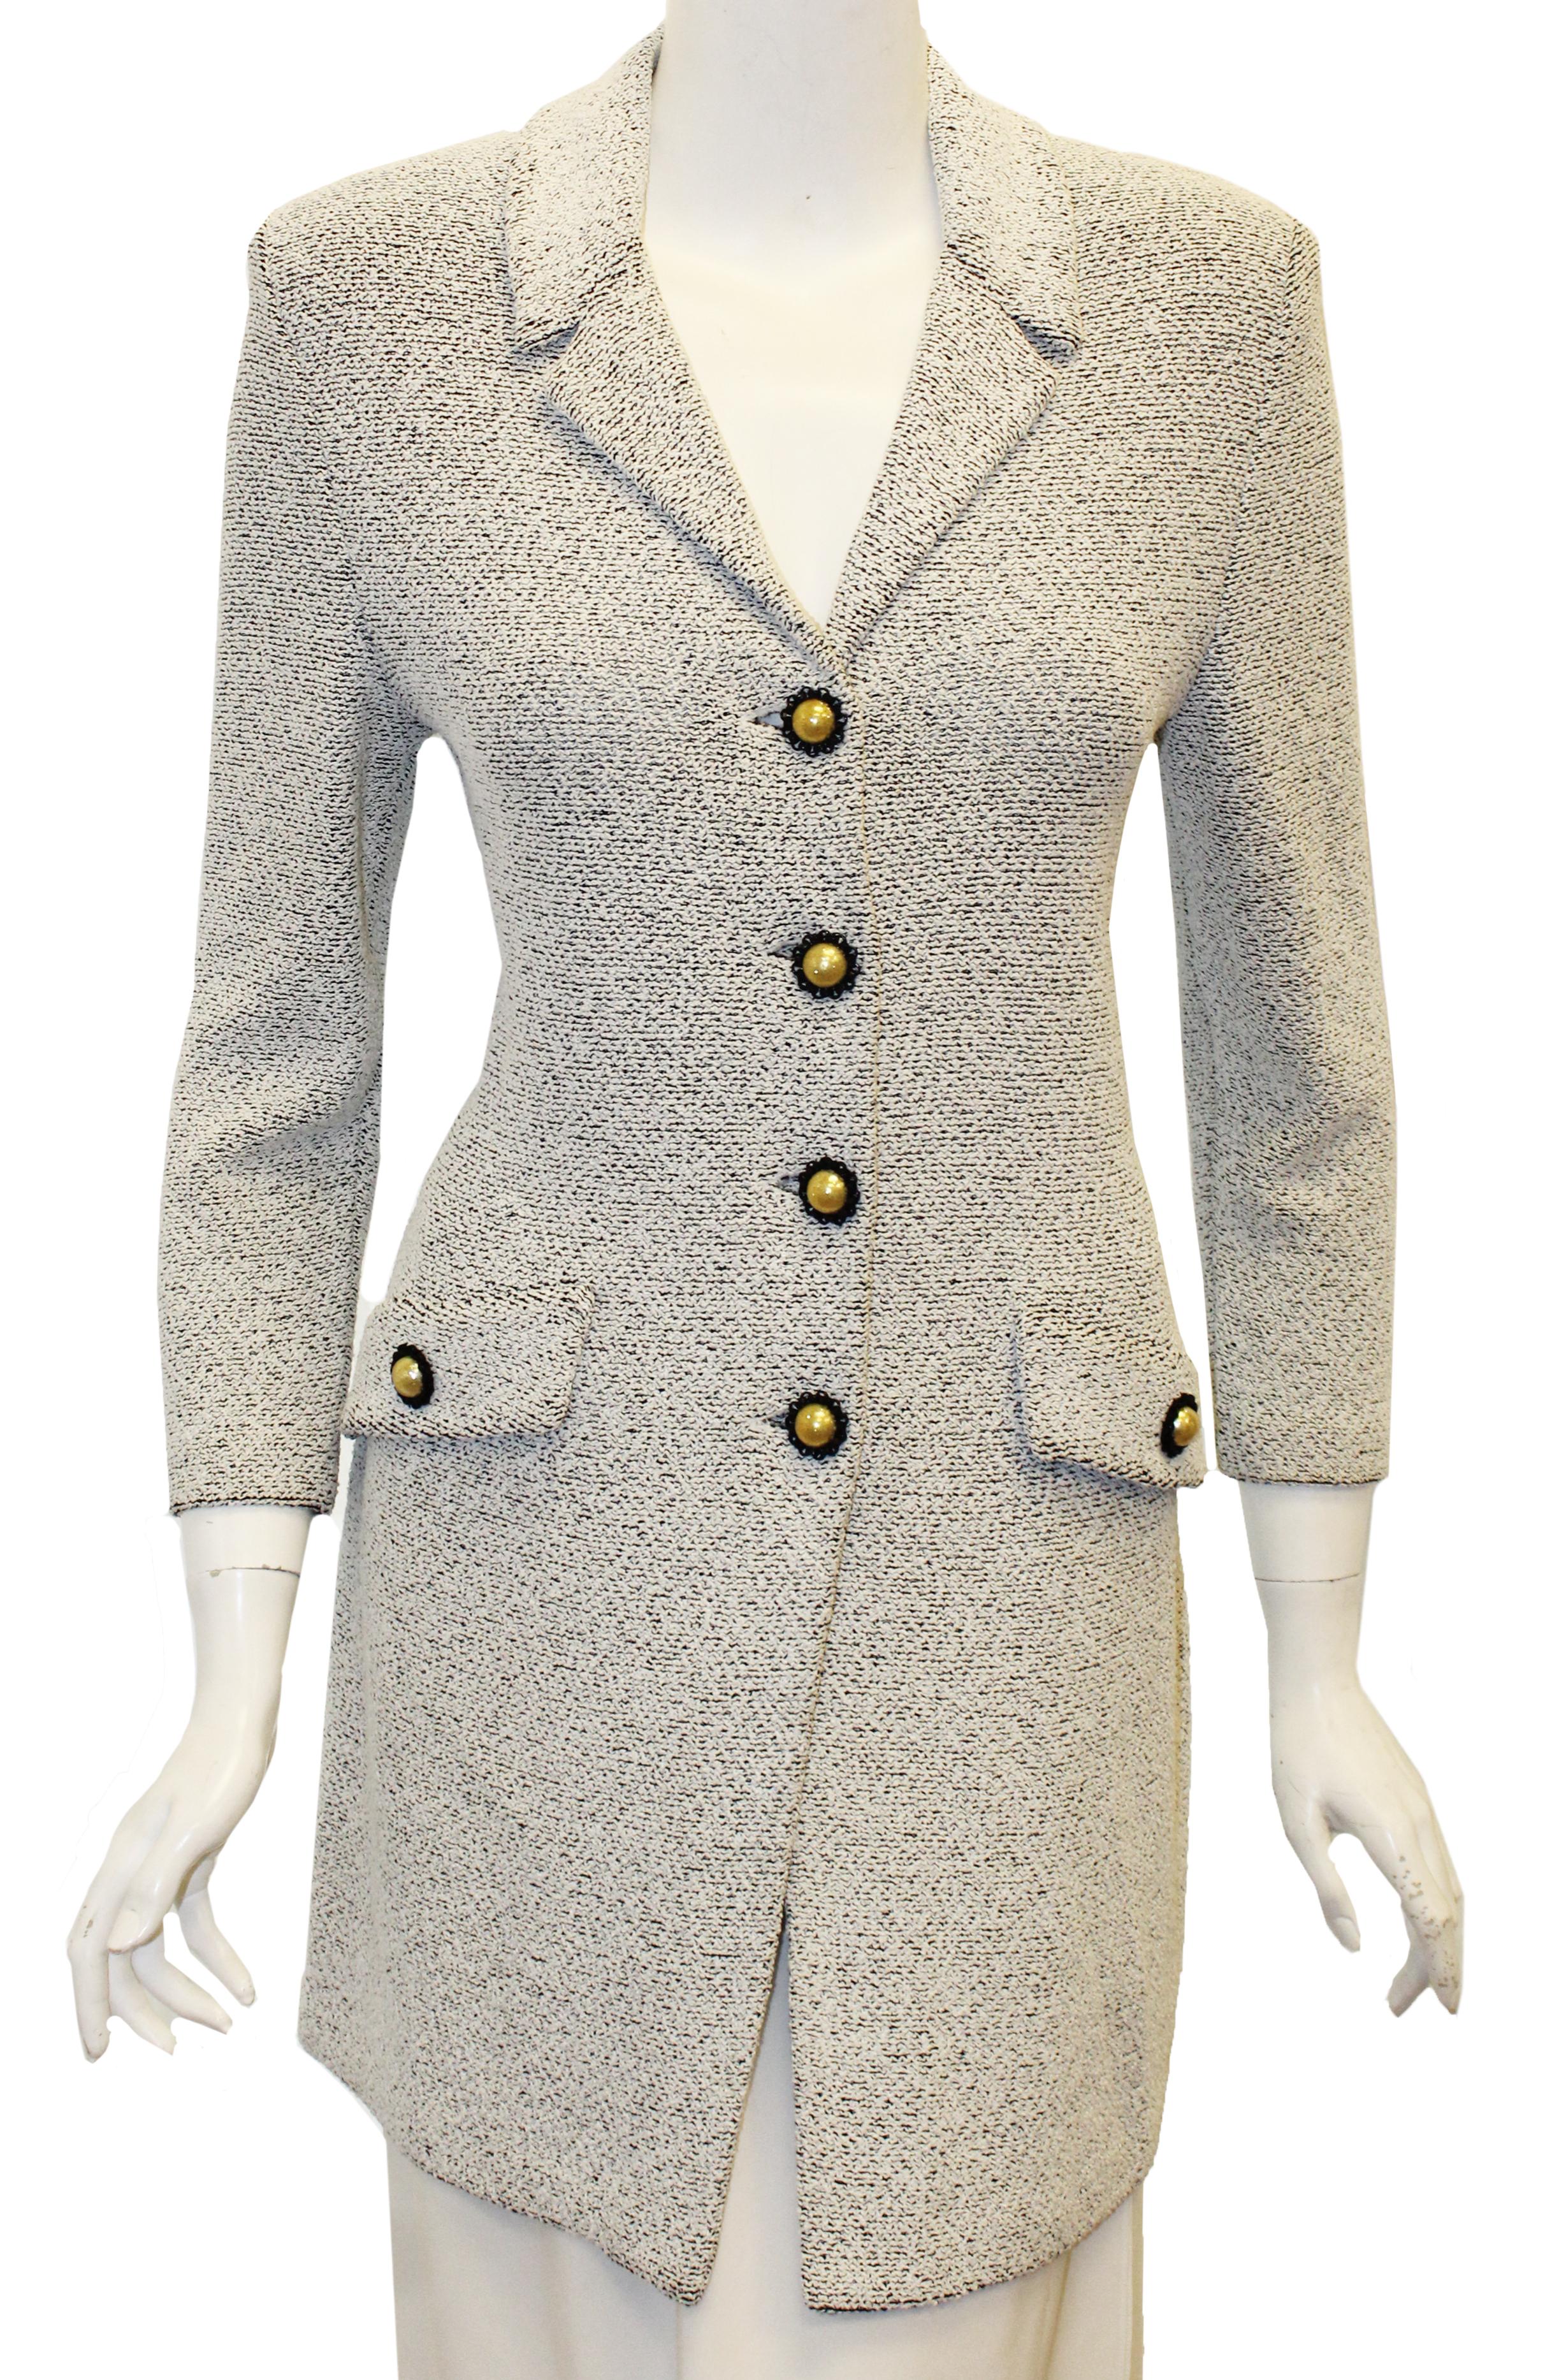 St. John black and white long jacket includes looped fringe collar.  This jacket has 2 front faux flap pockets at front with a St. John faux pearl  button.  For closure, 4 additional buttons are included.  This jacket is not lined and is in